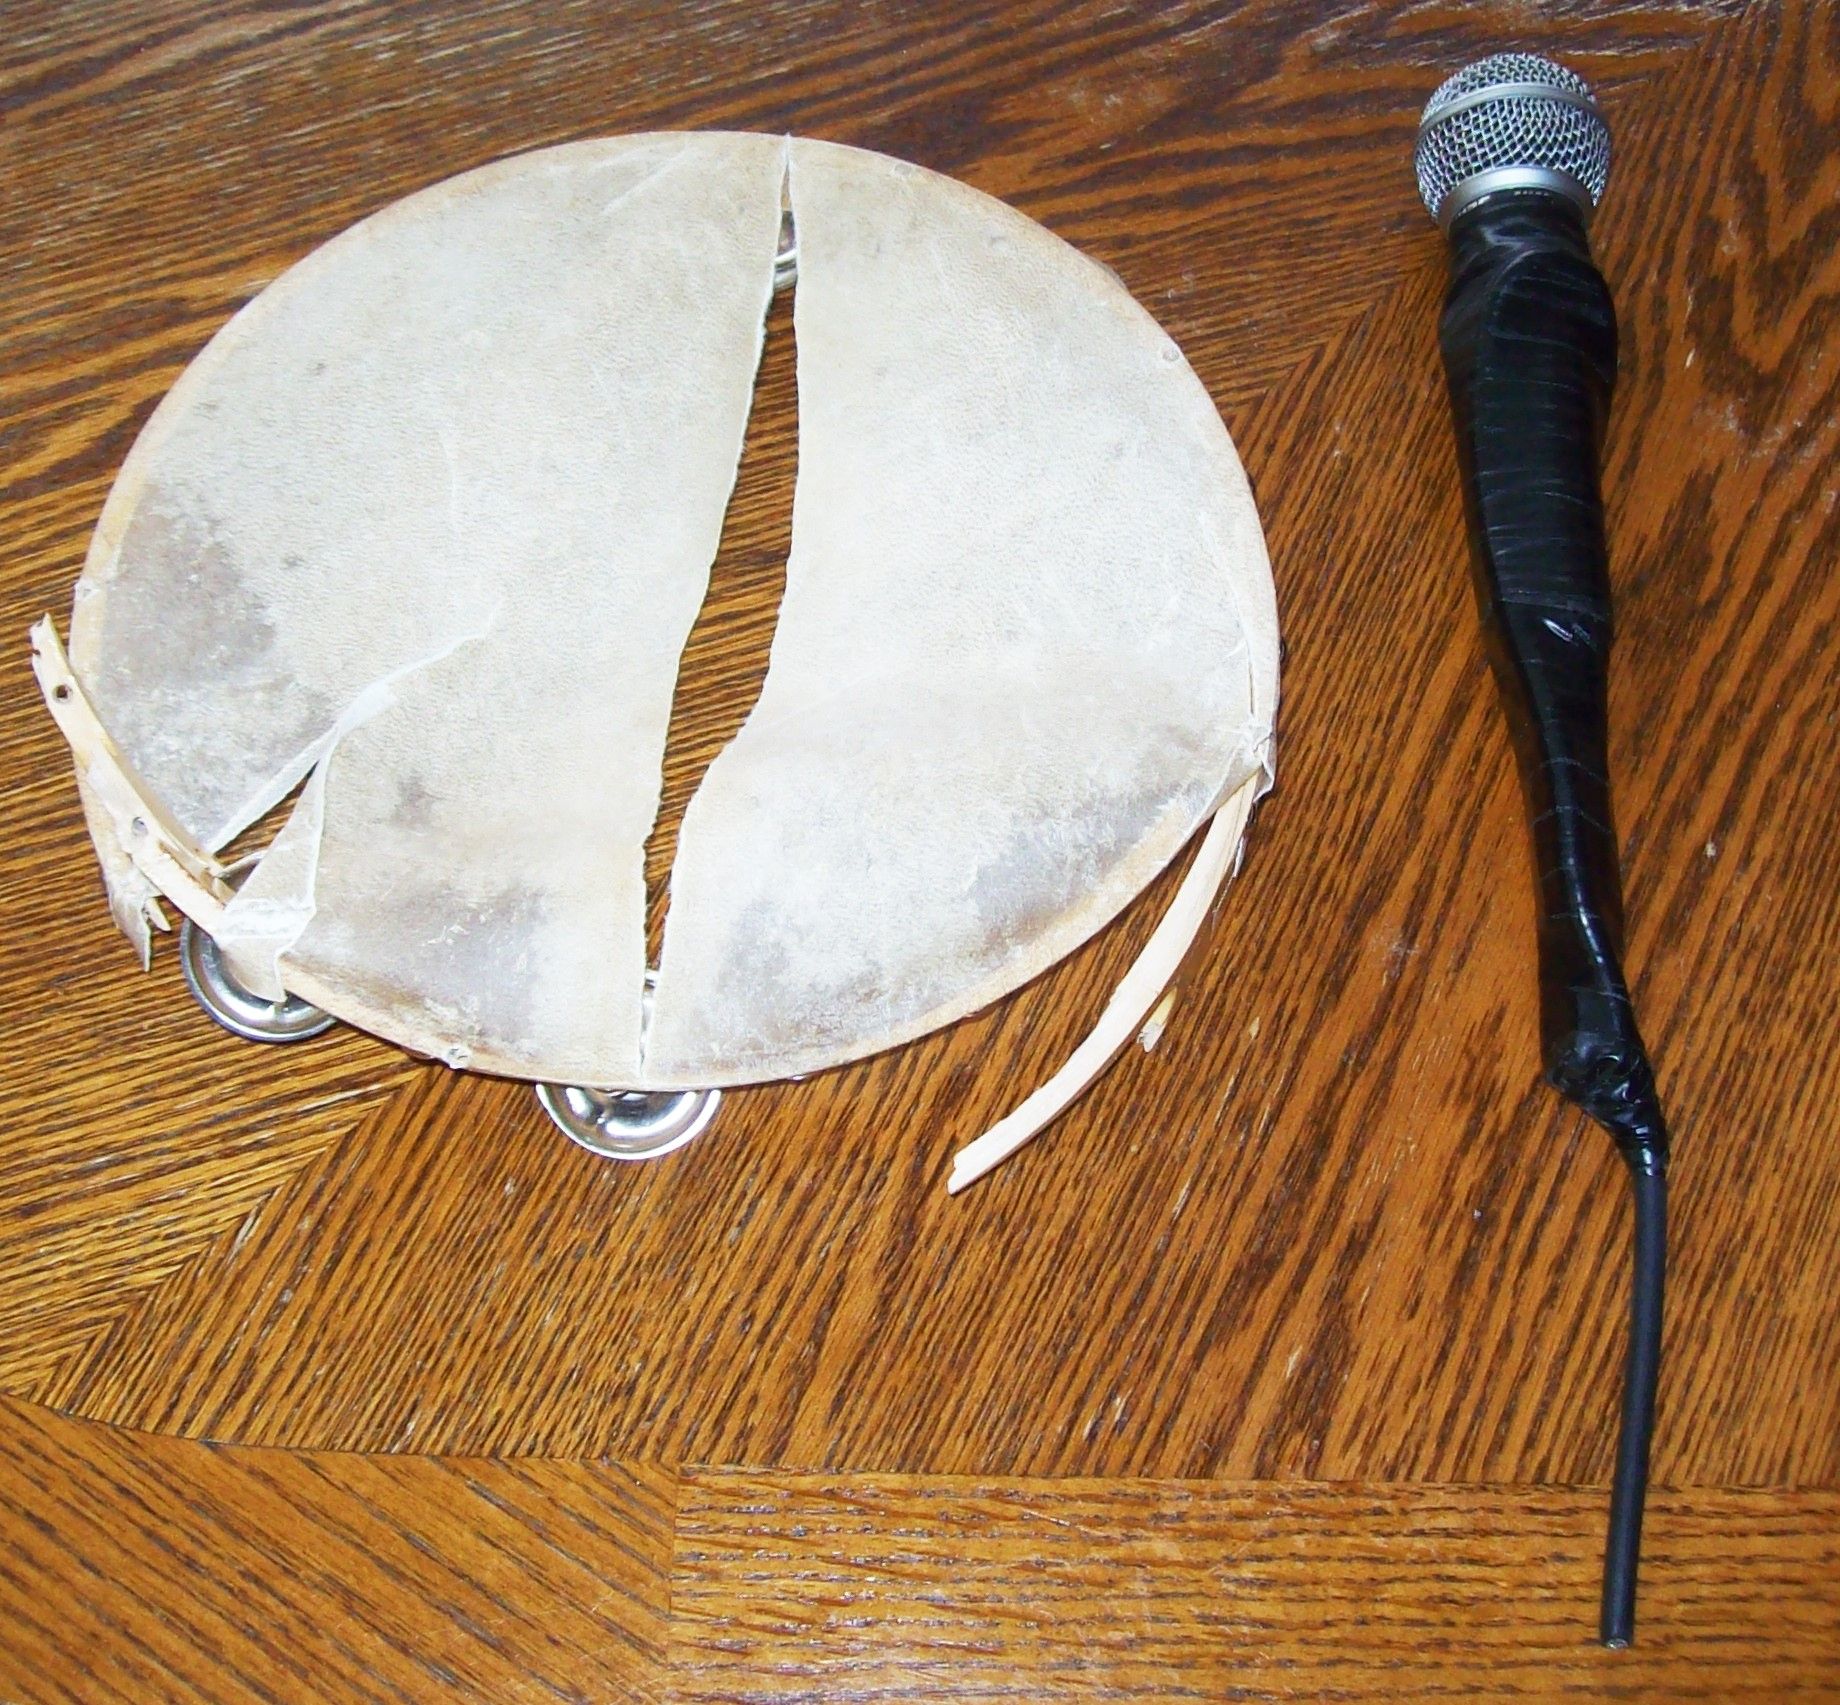 THE WHO ROGER DALTREY TAMBOURINE AND MICROPHONE USED ON THE 2006 WORLD TOUR